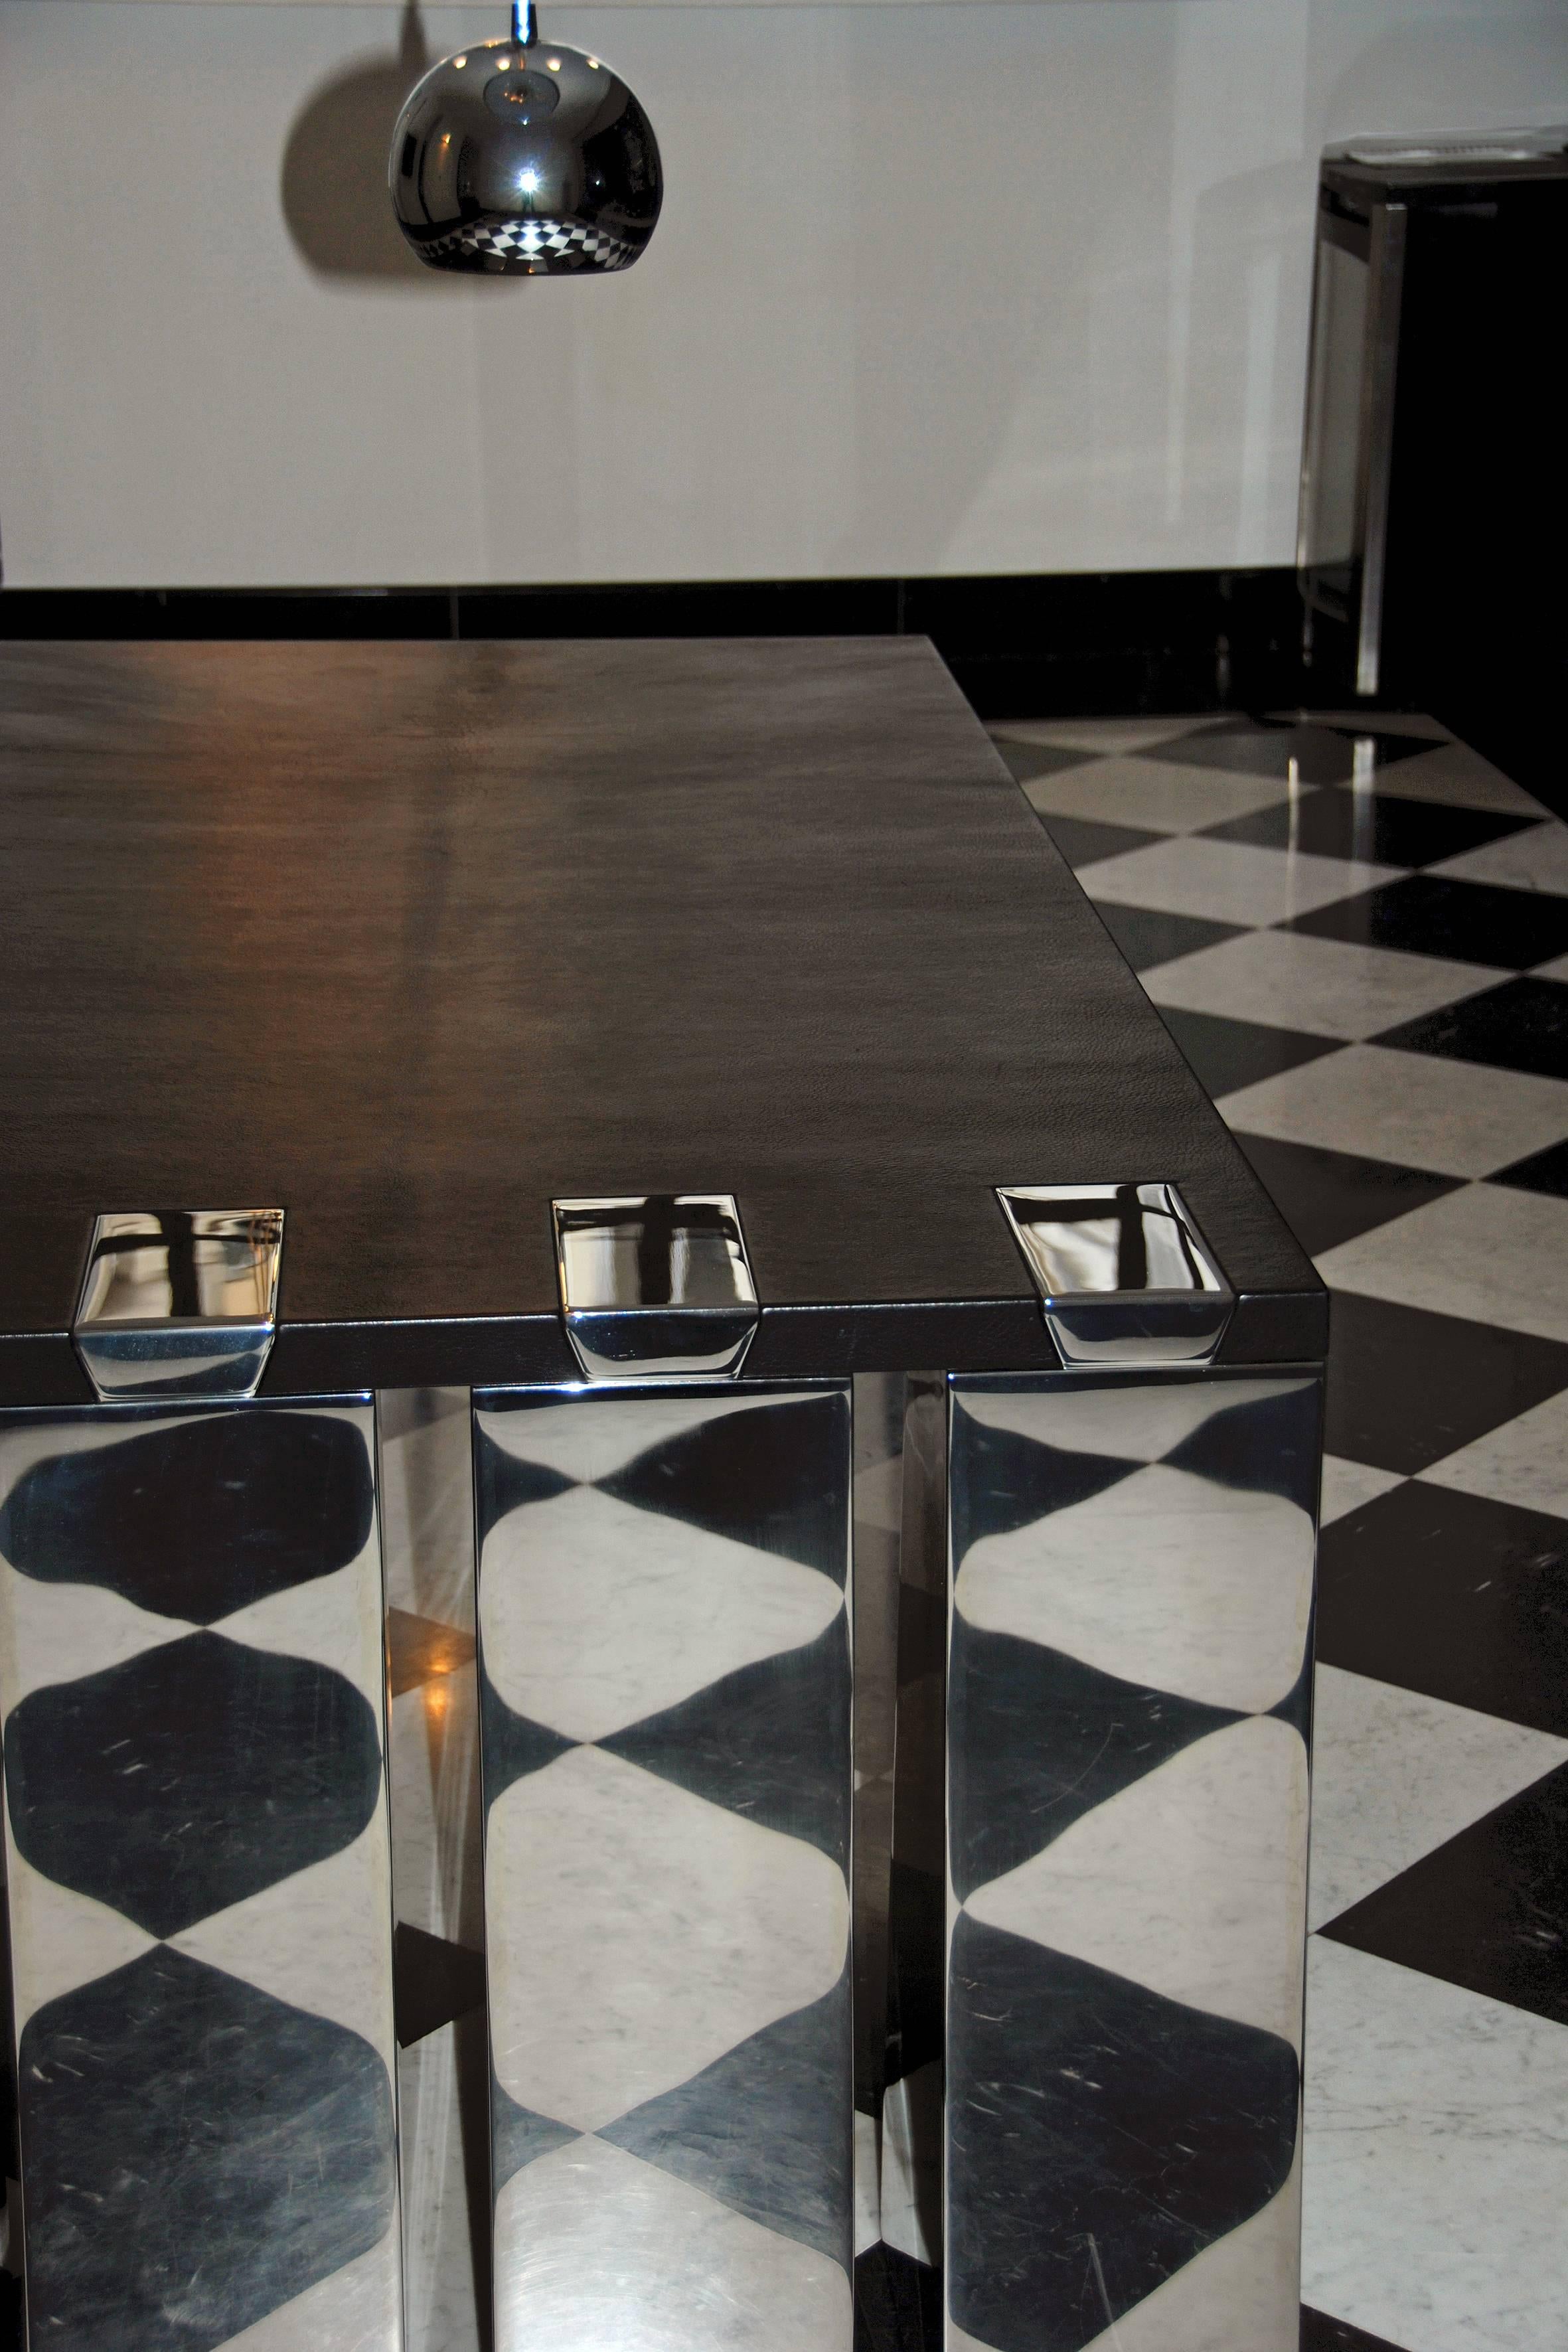 Polished Stainless Steel and Leather Desk 'Zeus' N°1 /8 by Vincent Poujardieu For Sale